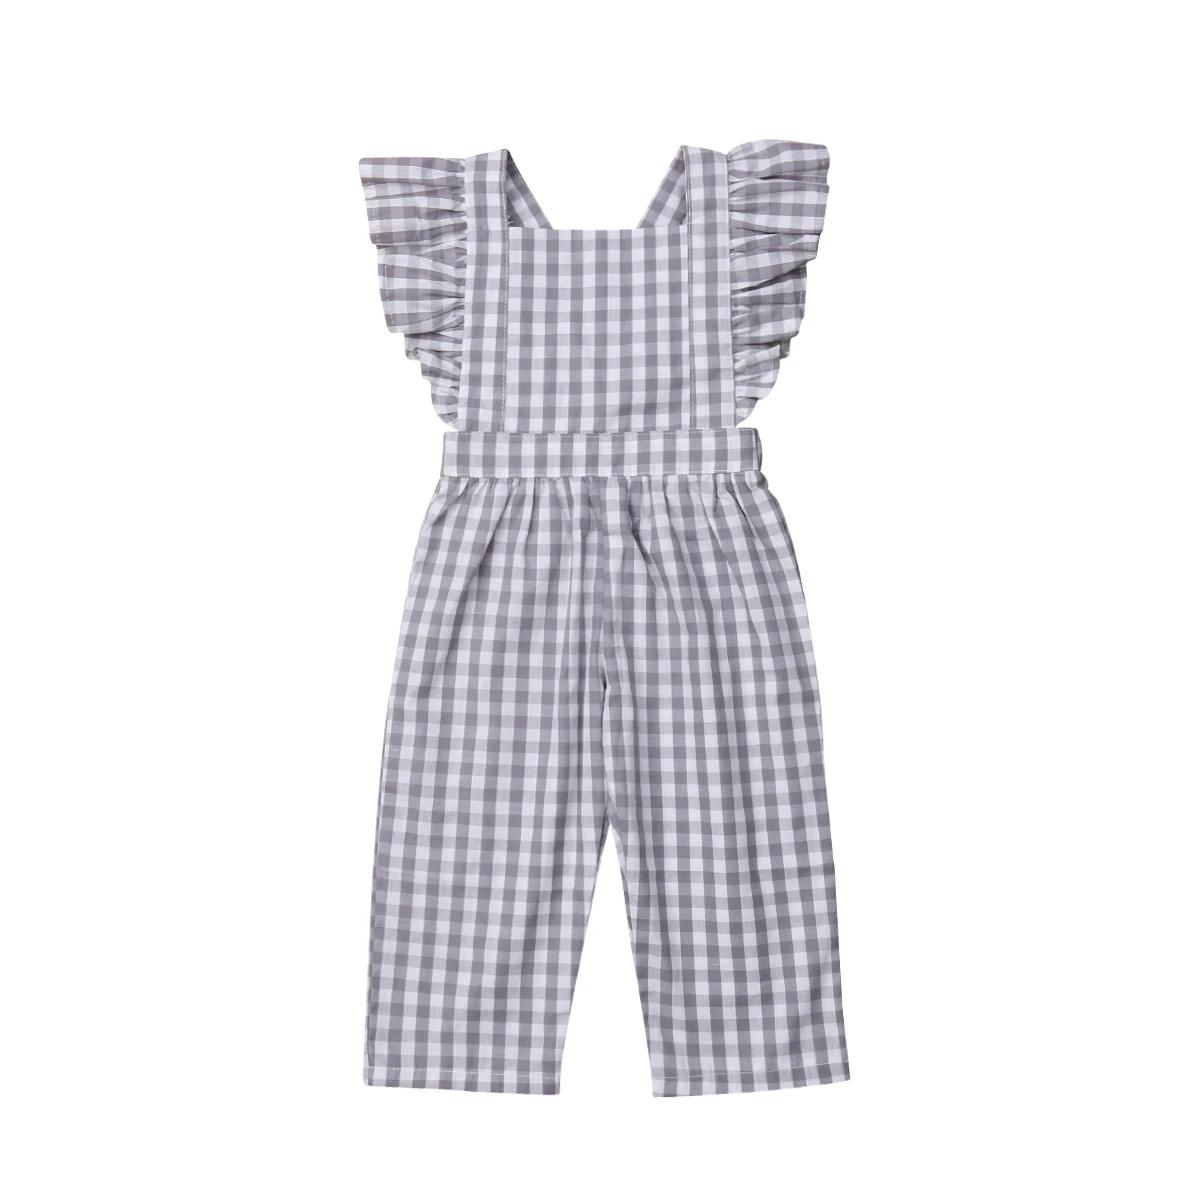 

Plaid Jumpsuit 2020 Brand New Infant Baby Girl Rompers Fly Sleeve Backless Check Jumpsuit Playsuit Overalls Clothes Outfits